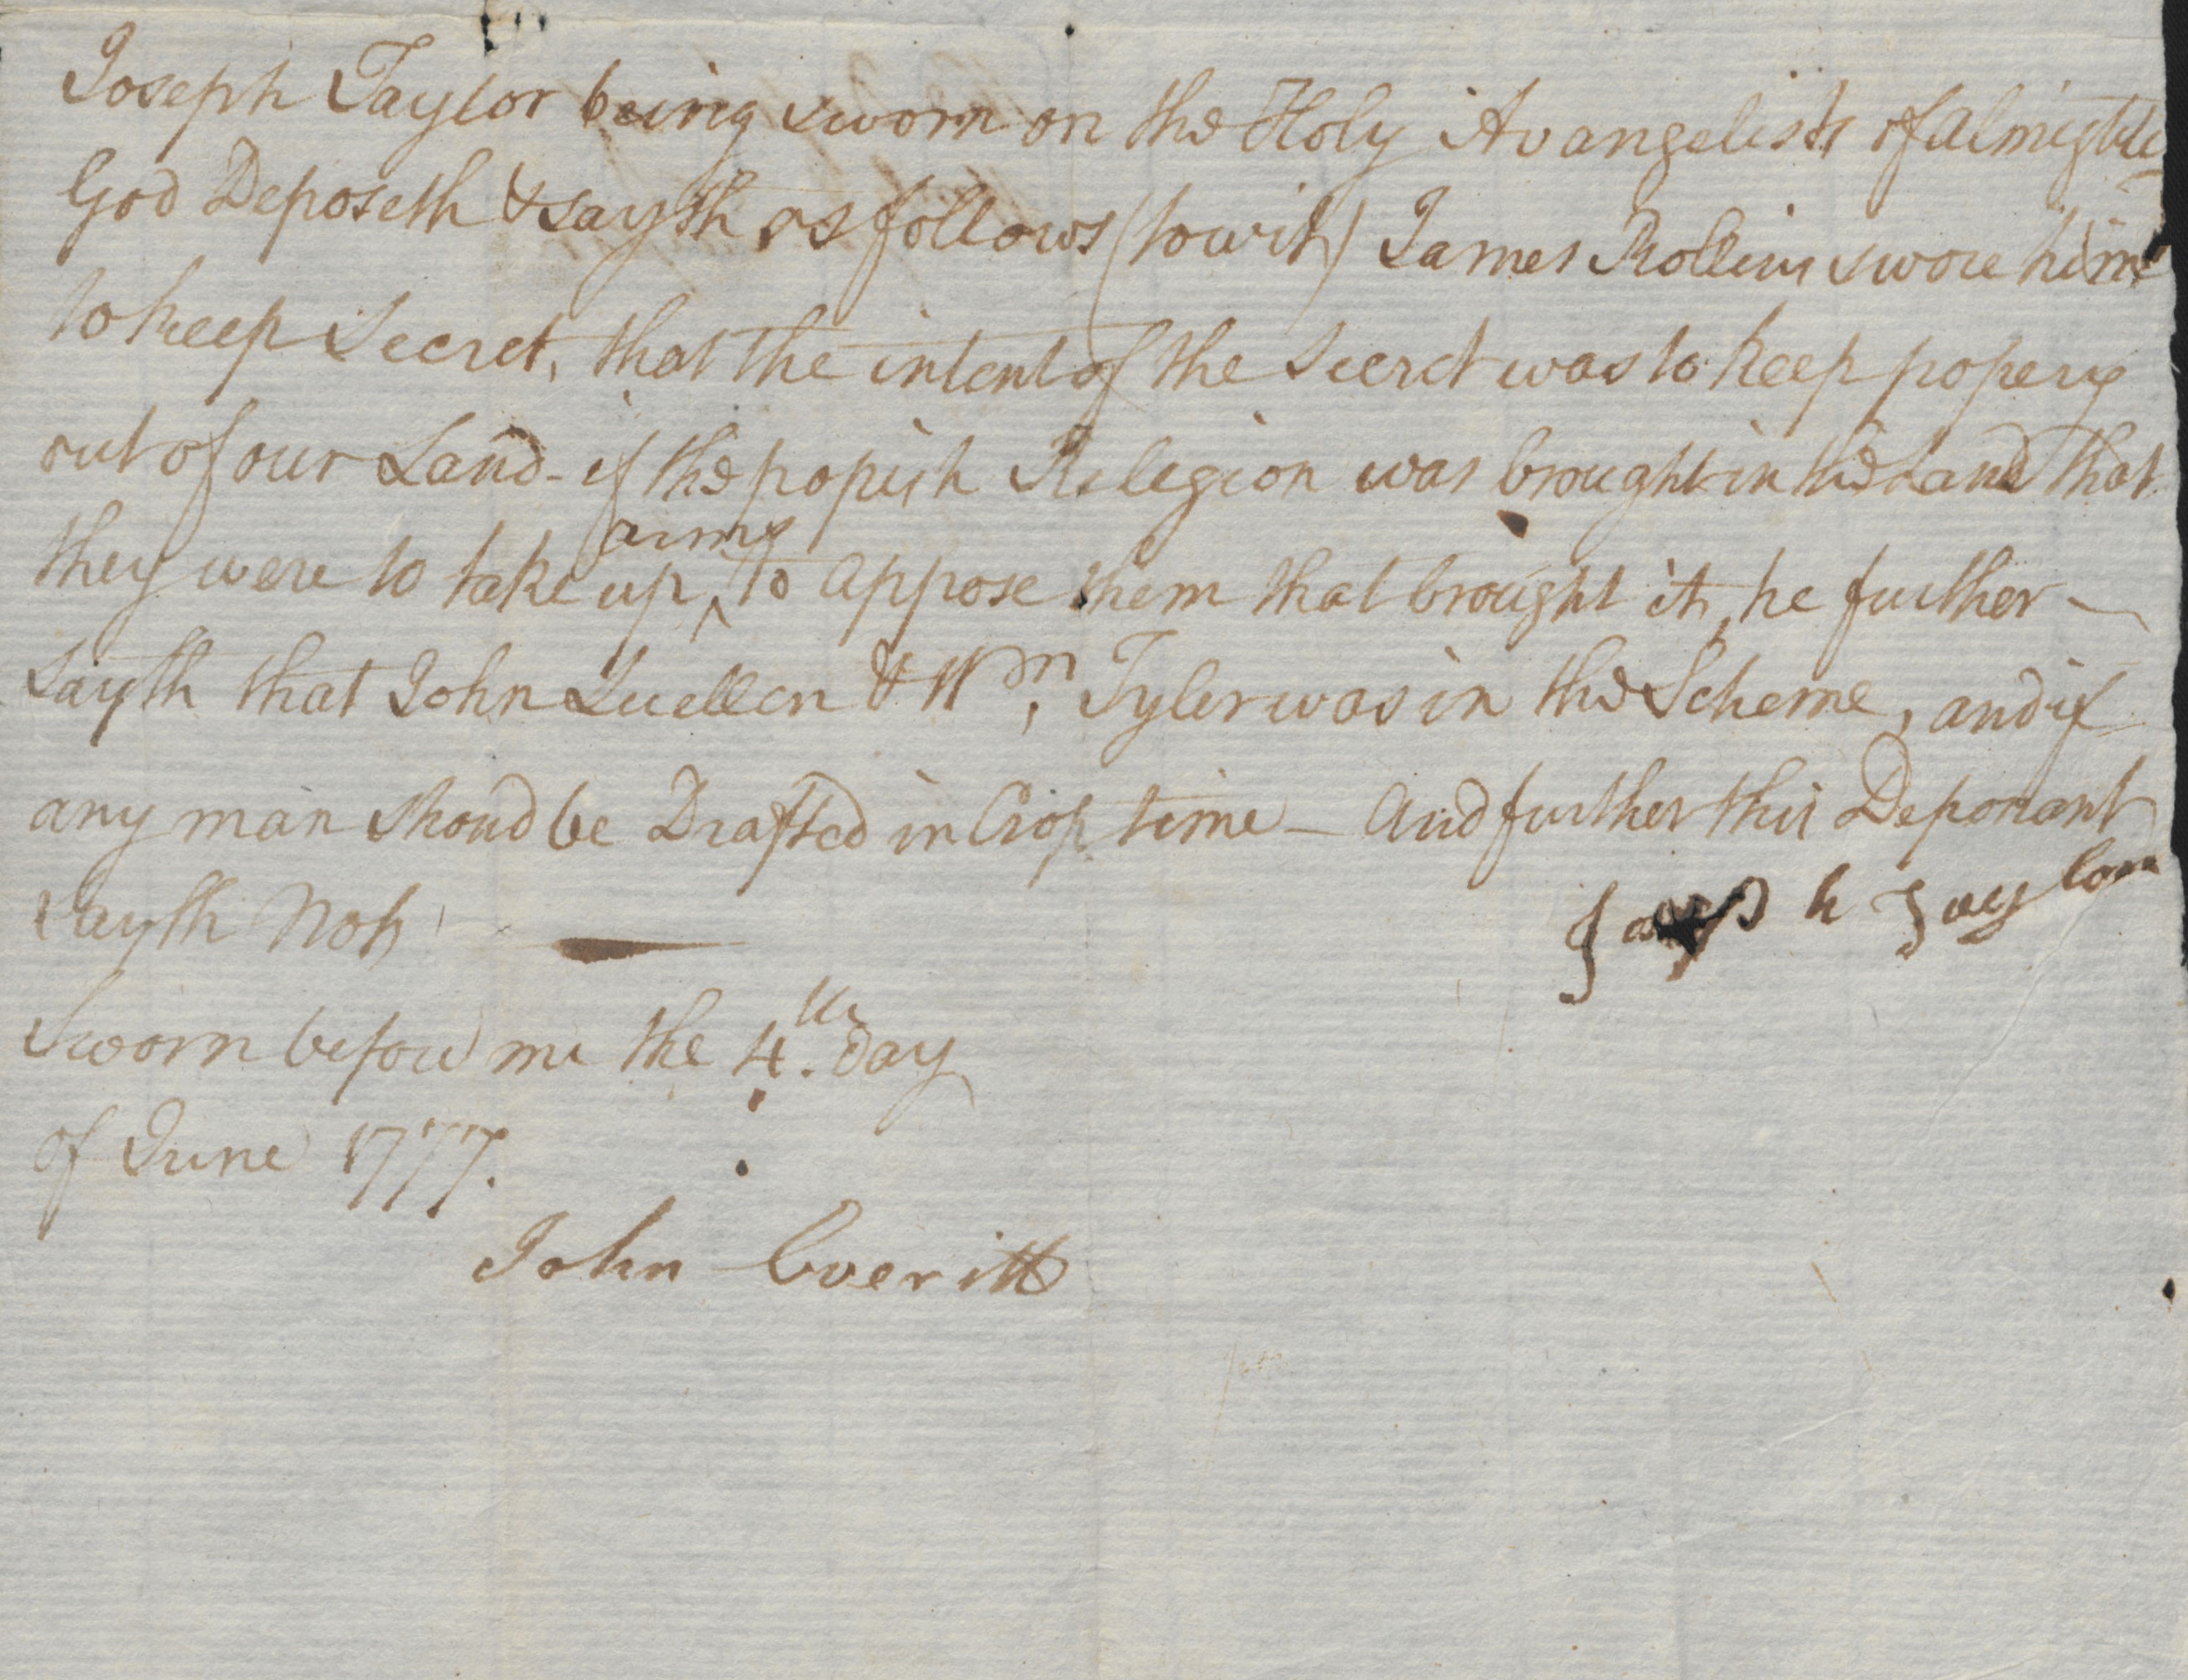 Deposition of Joseph Taylor, 4 June 1777, page 1